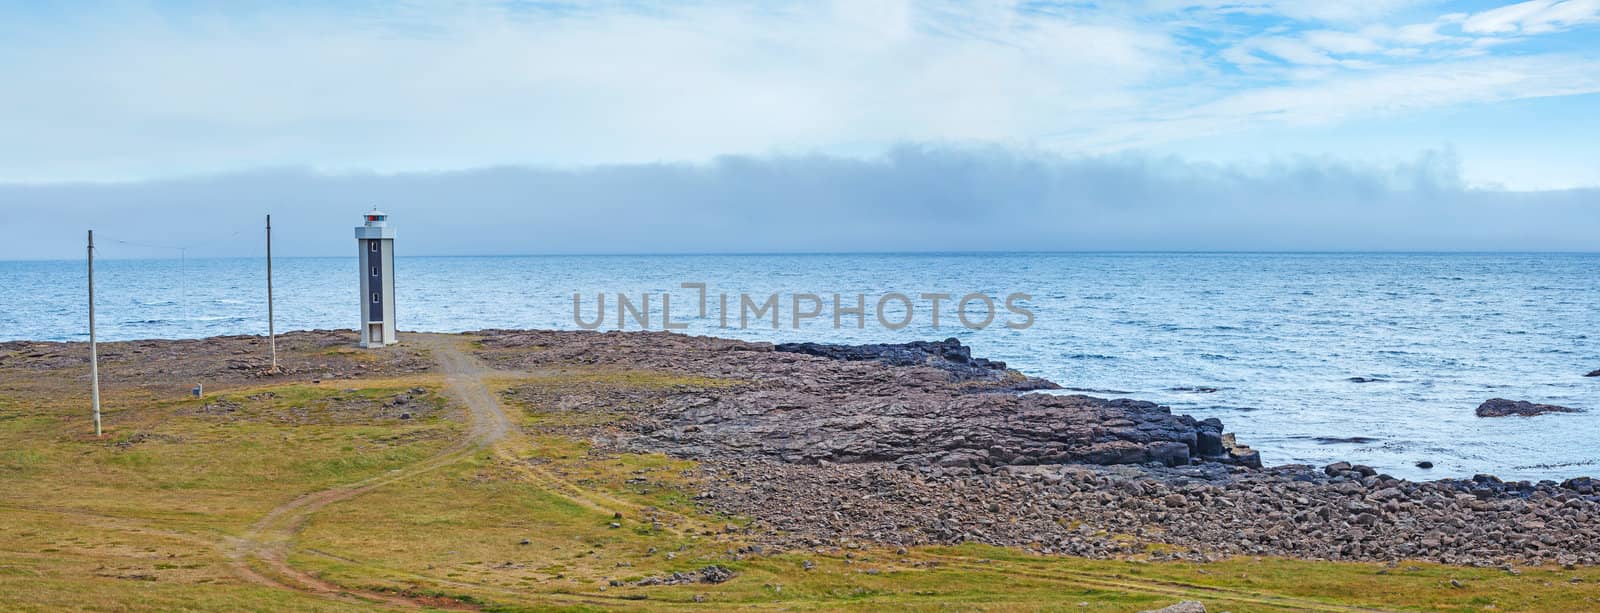 North Iceland Sea Landscape With Lighthouse by maxoliki